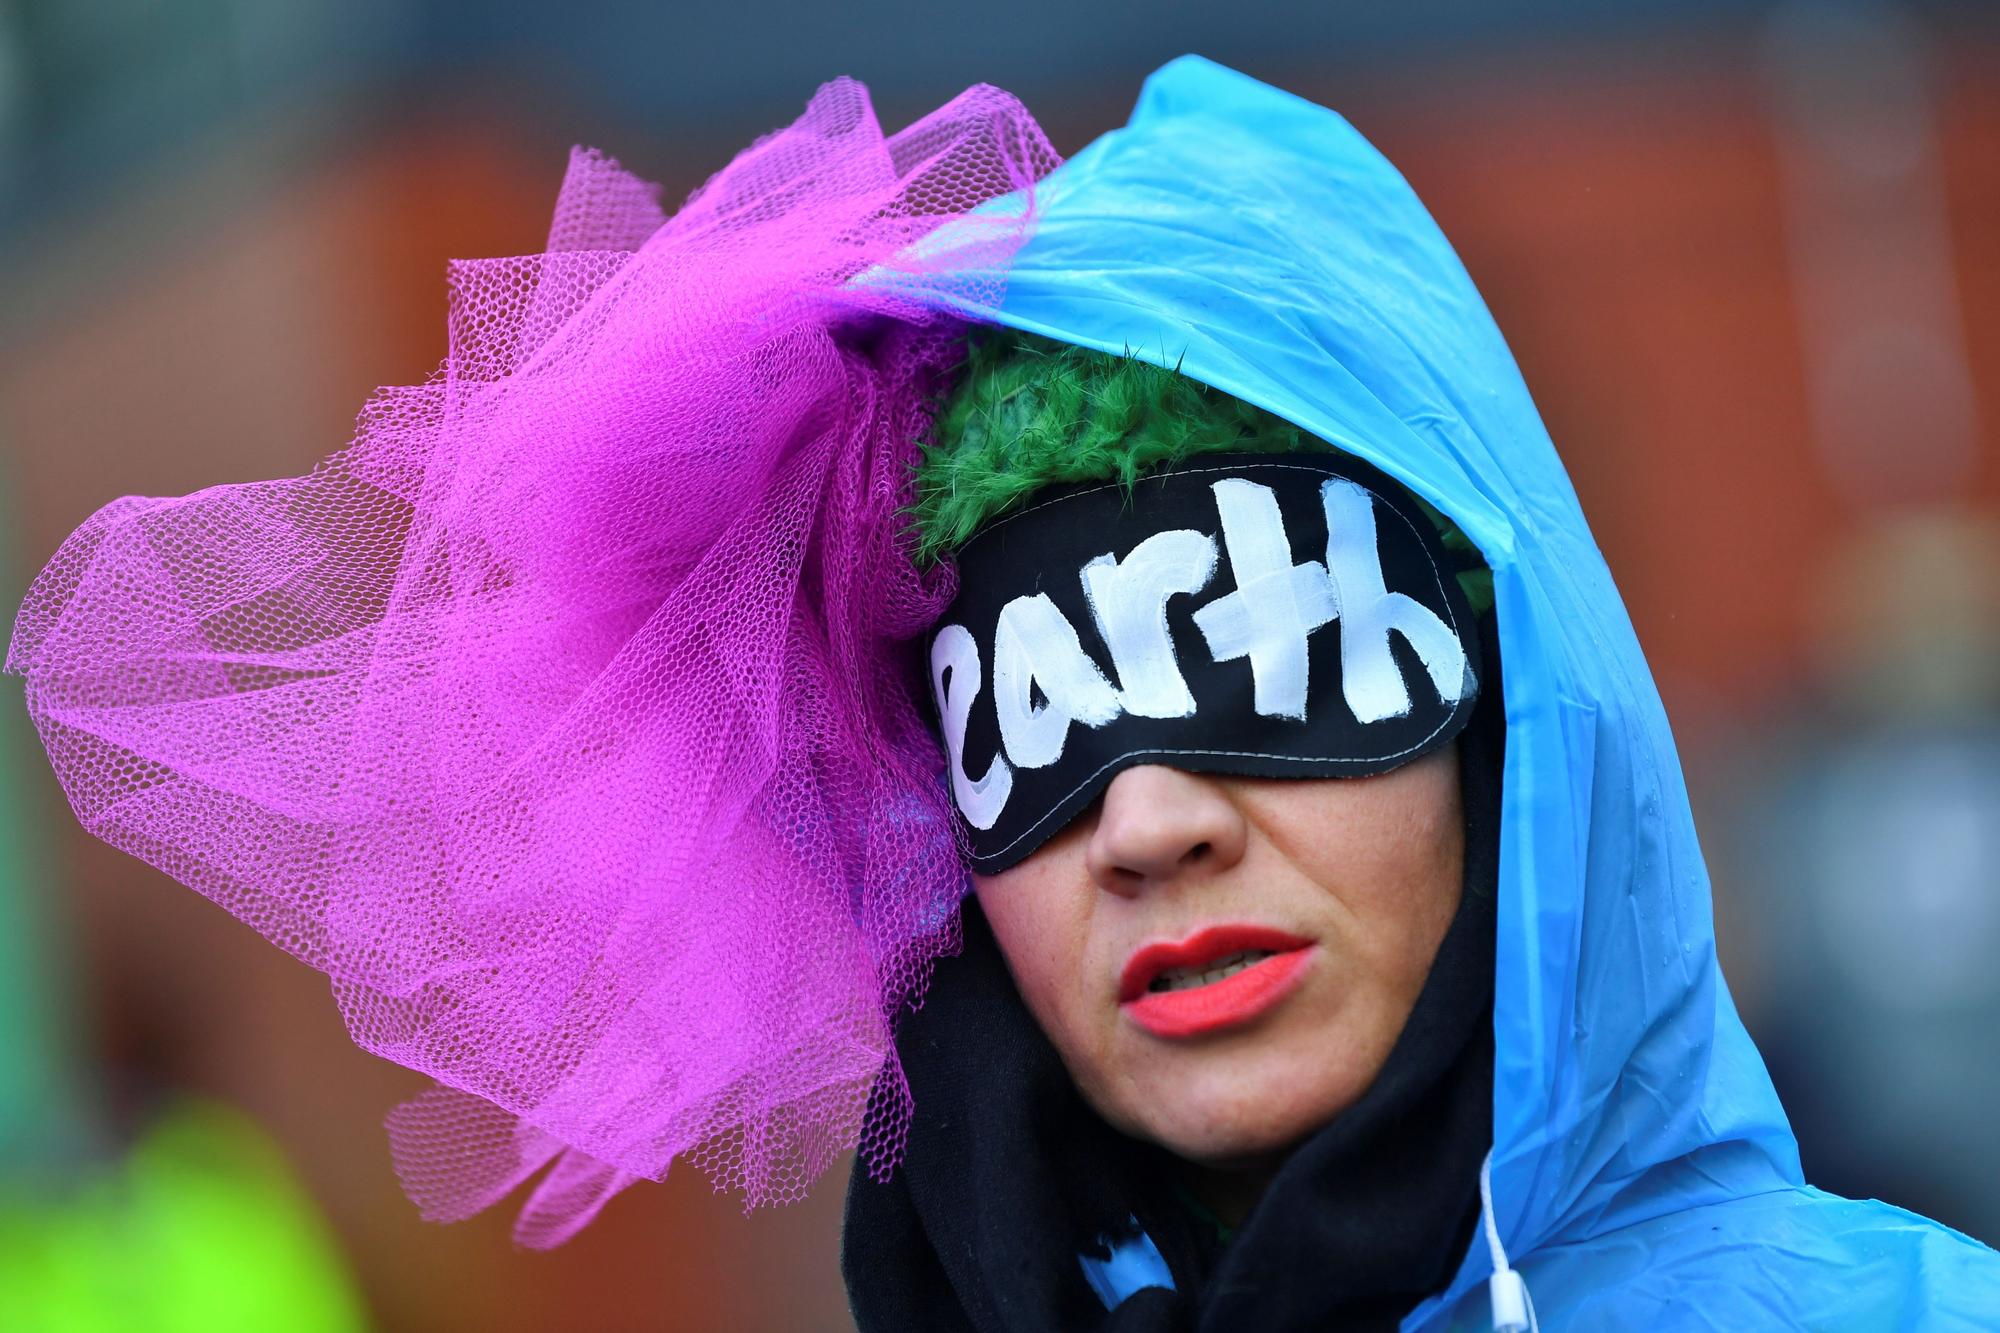 A person demonstrates near the UN Climate Change Conference (COP26) venue, in Glasgow, Scotland, Britain November 12, 2021. REUTERS/Dylan Martinez TPX IMAGES OF THE DAY